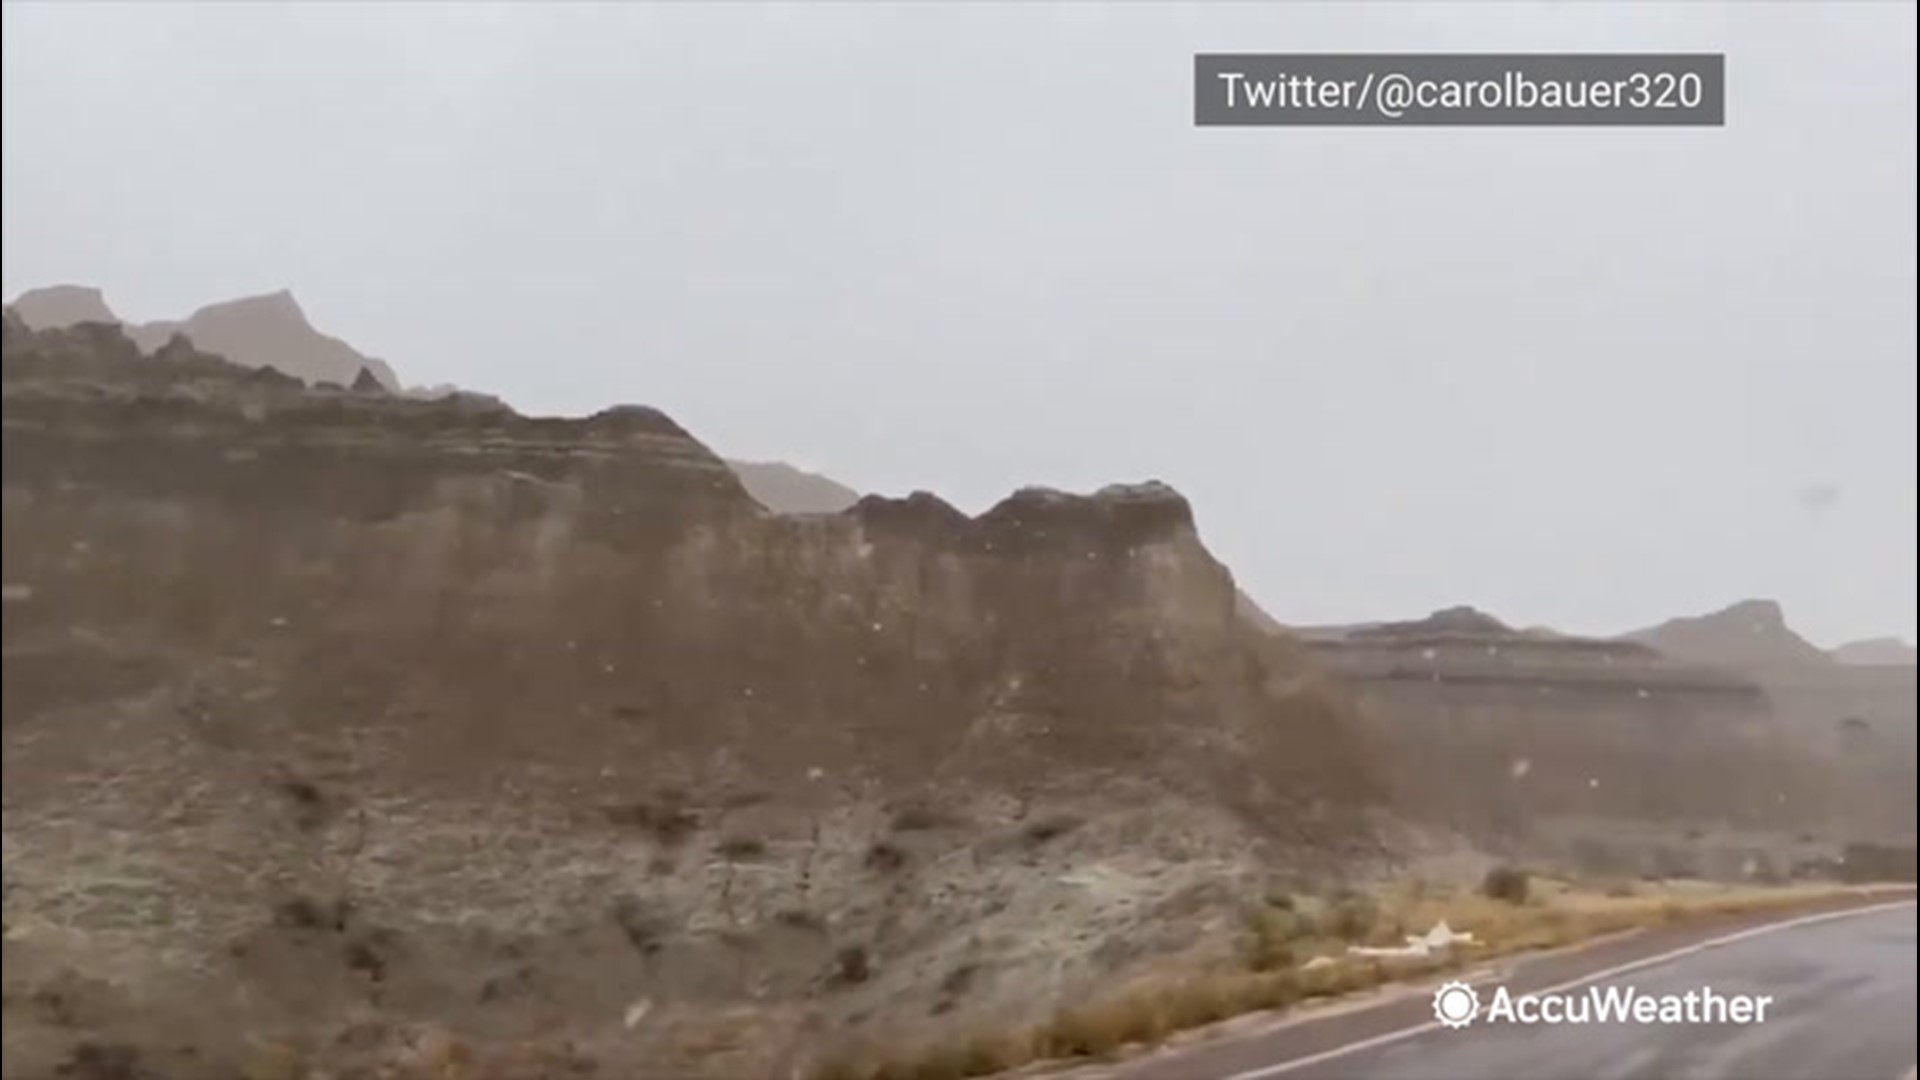 Snow flew near Wall, South Dakota, across the Badlands National Park on Saturday, Oct. 17, along with chilly air for October.